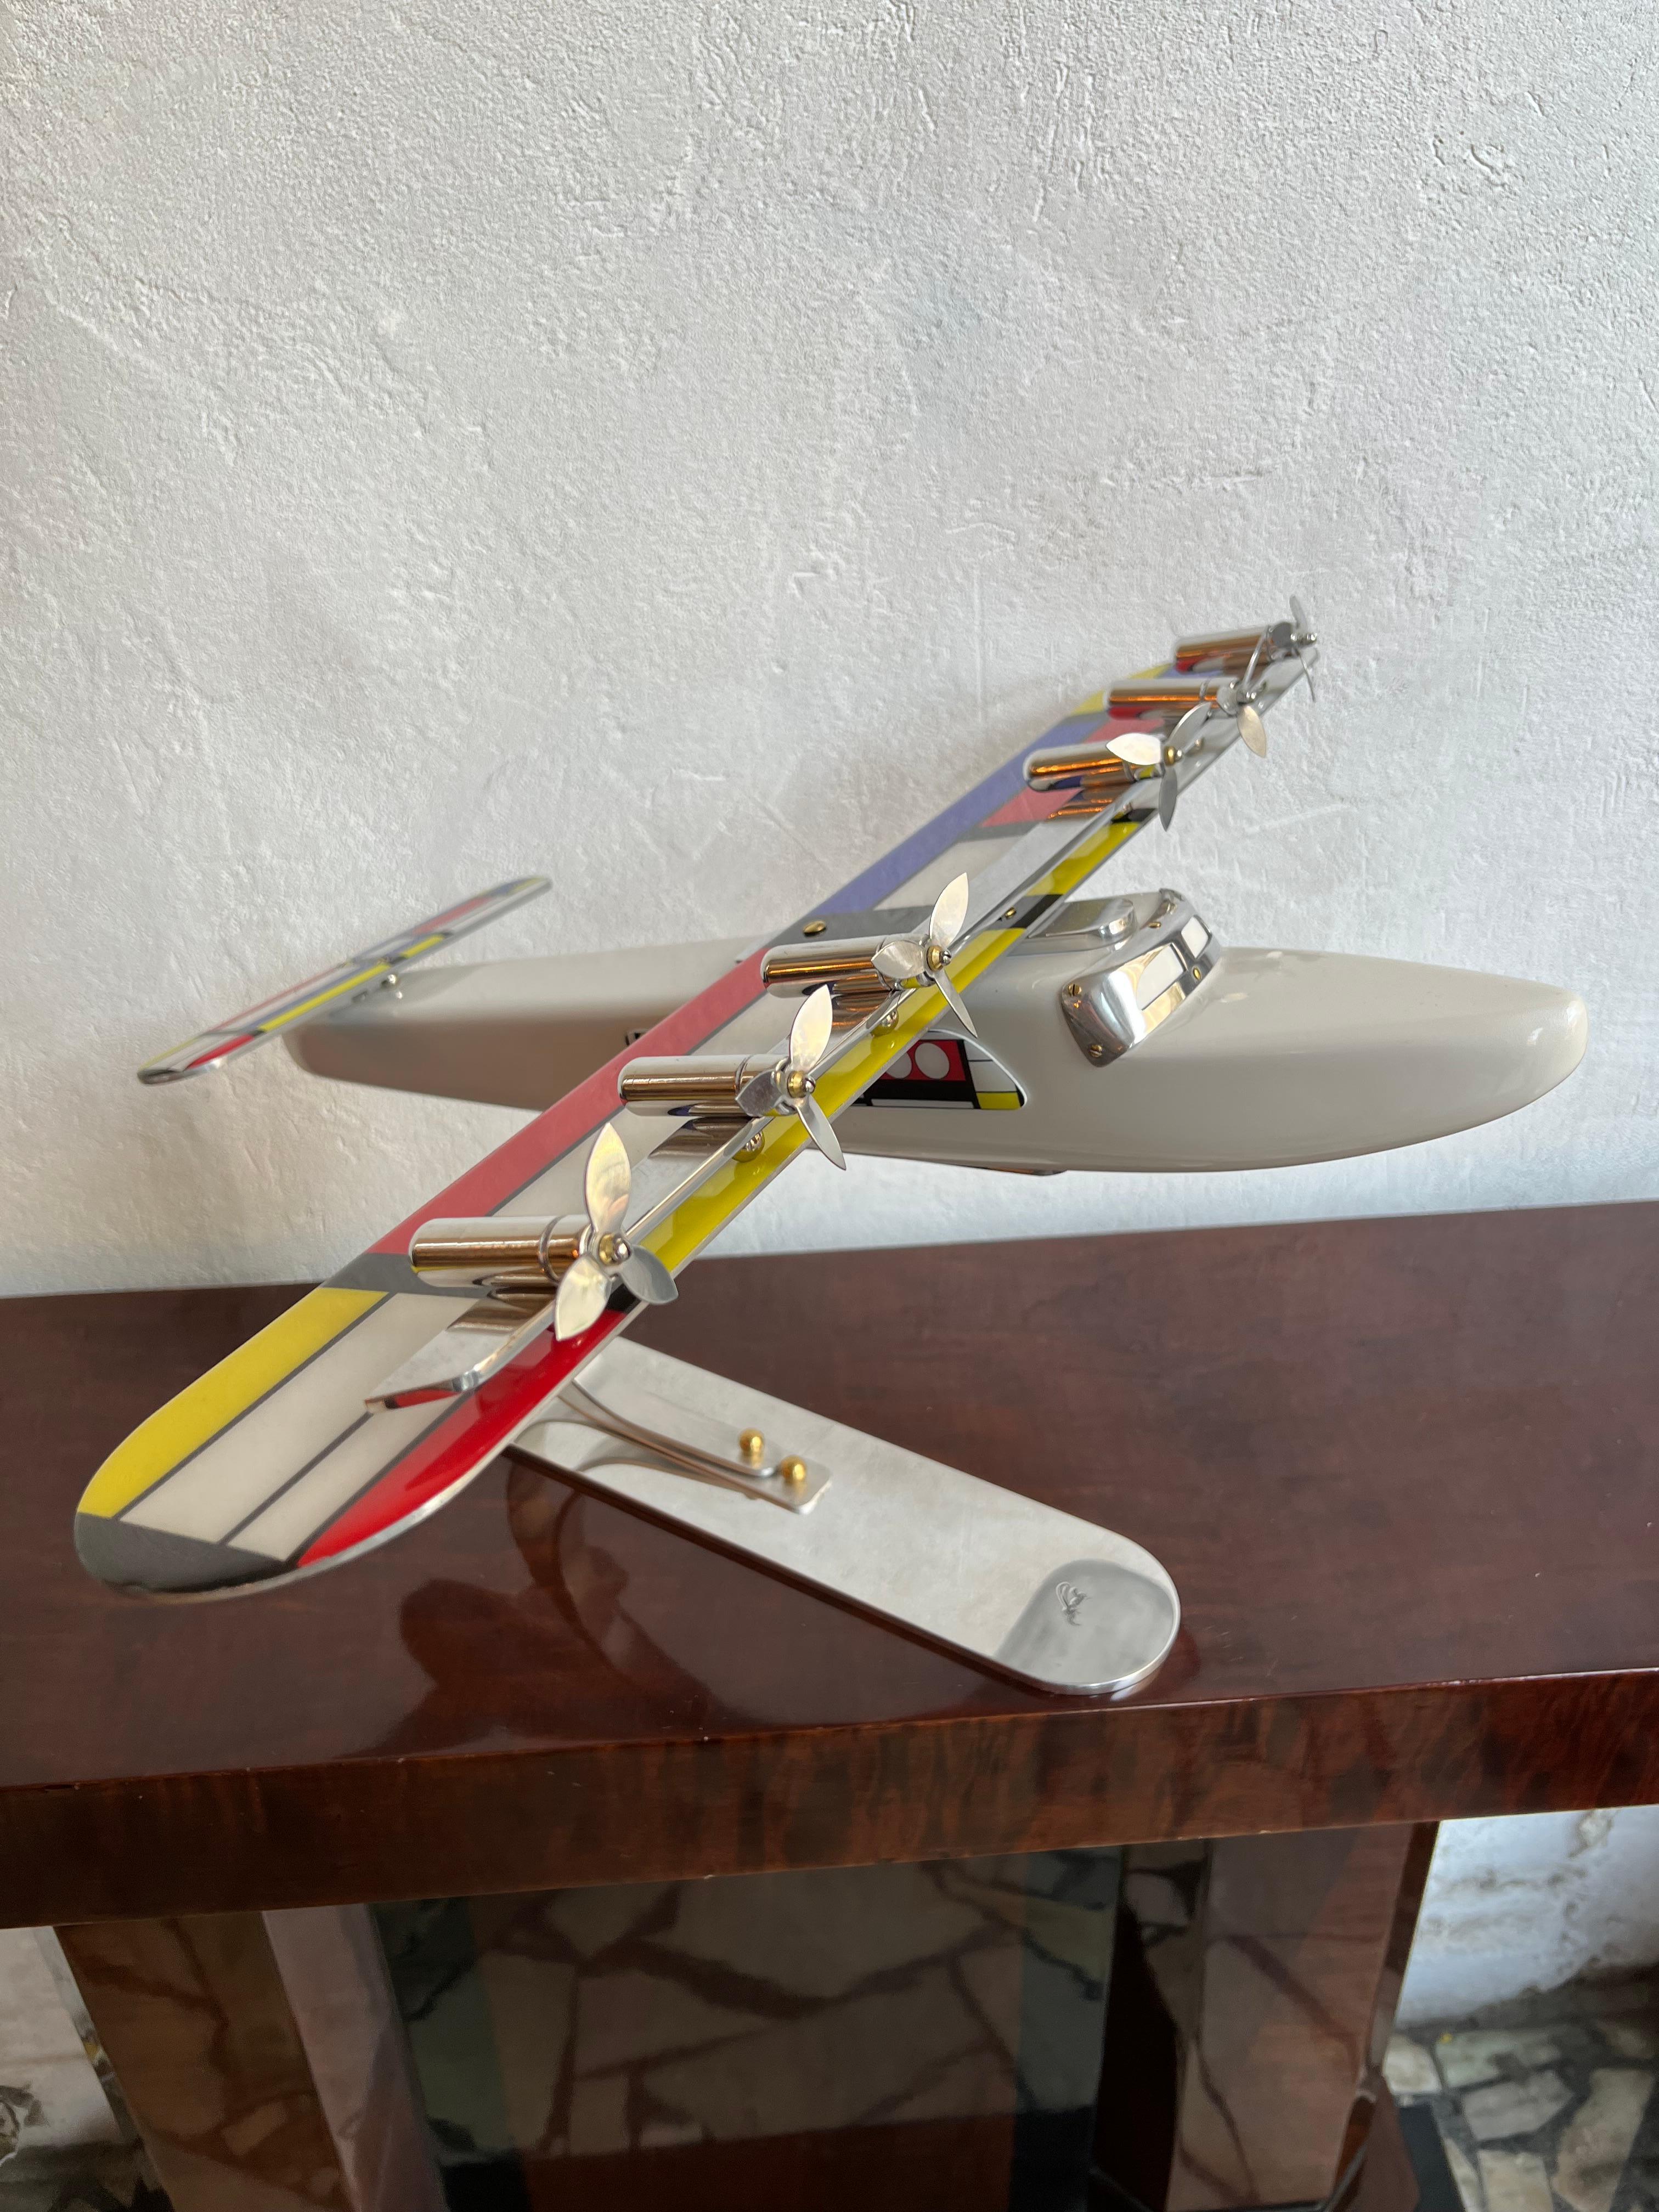 Art Deco Inspired Airplane in Wood and Steel Designer, Marcelo Peña, 2014 For Sale 6